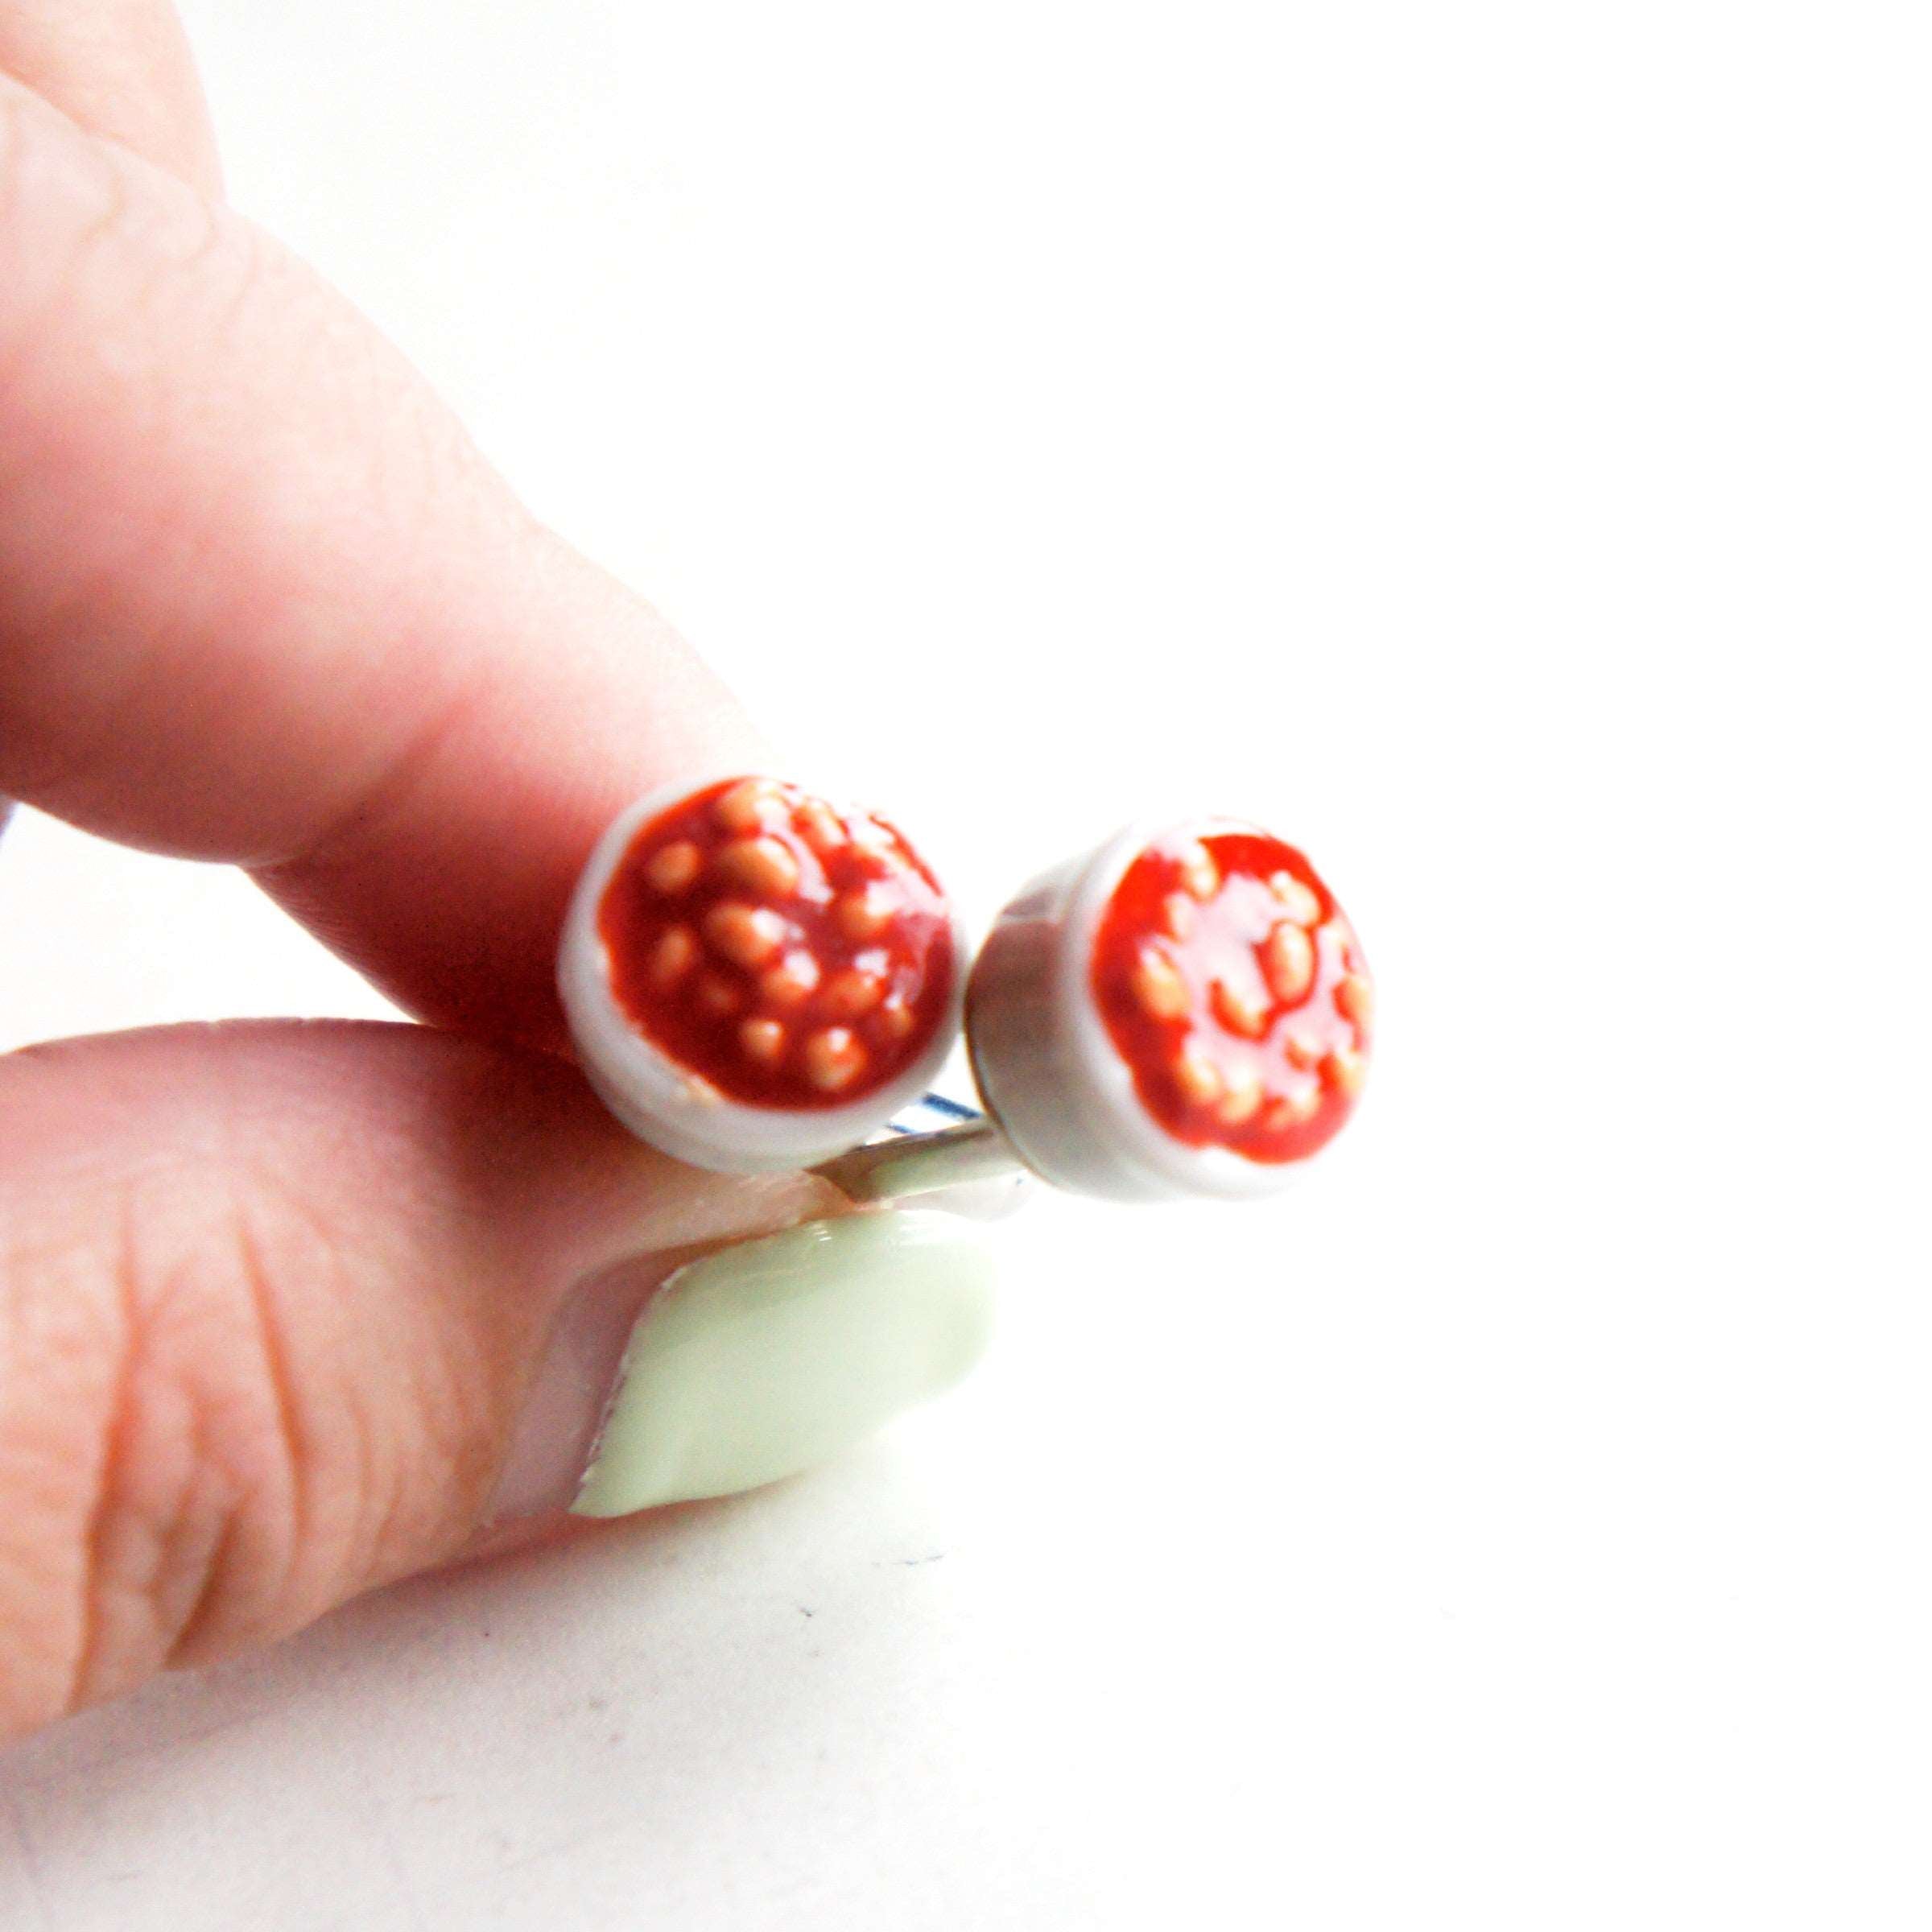 Baked Beans Cuff Links - Jillicious charms and accessories